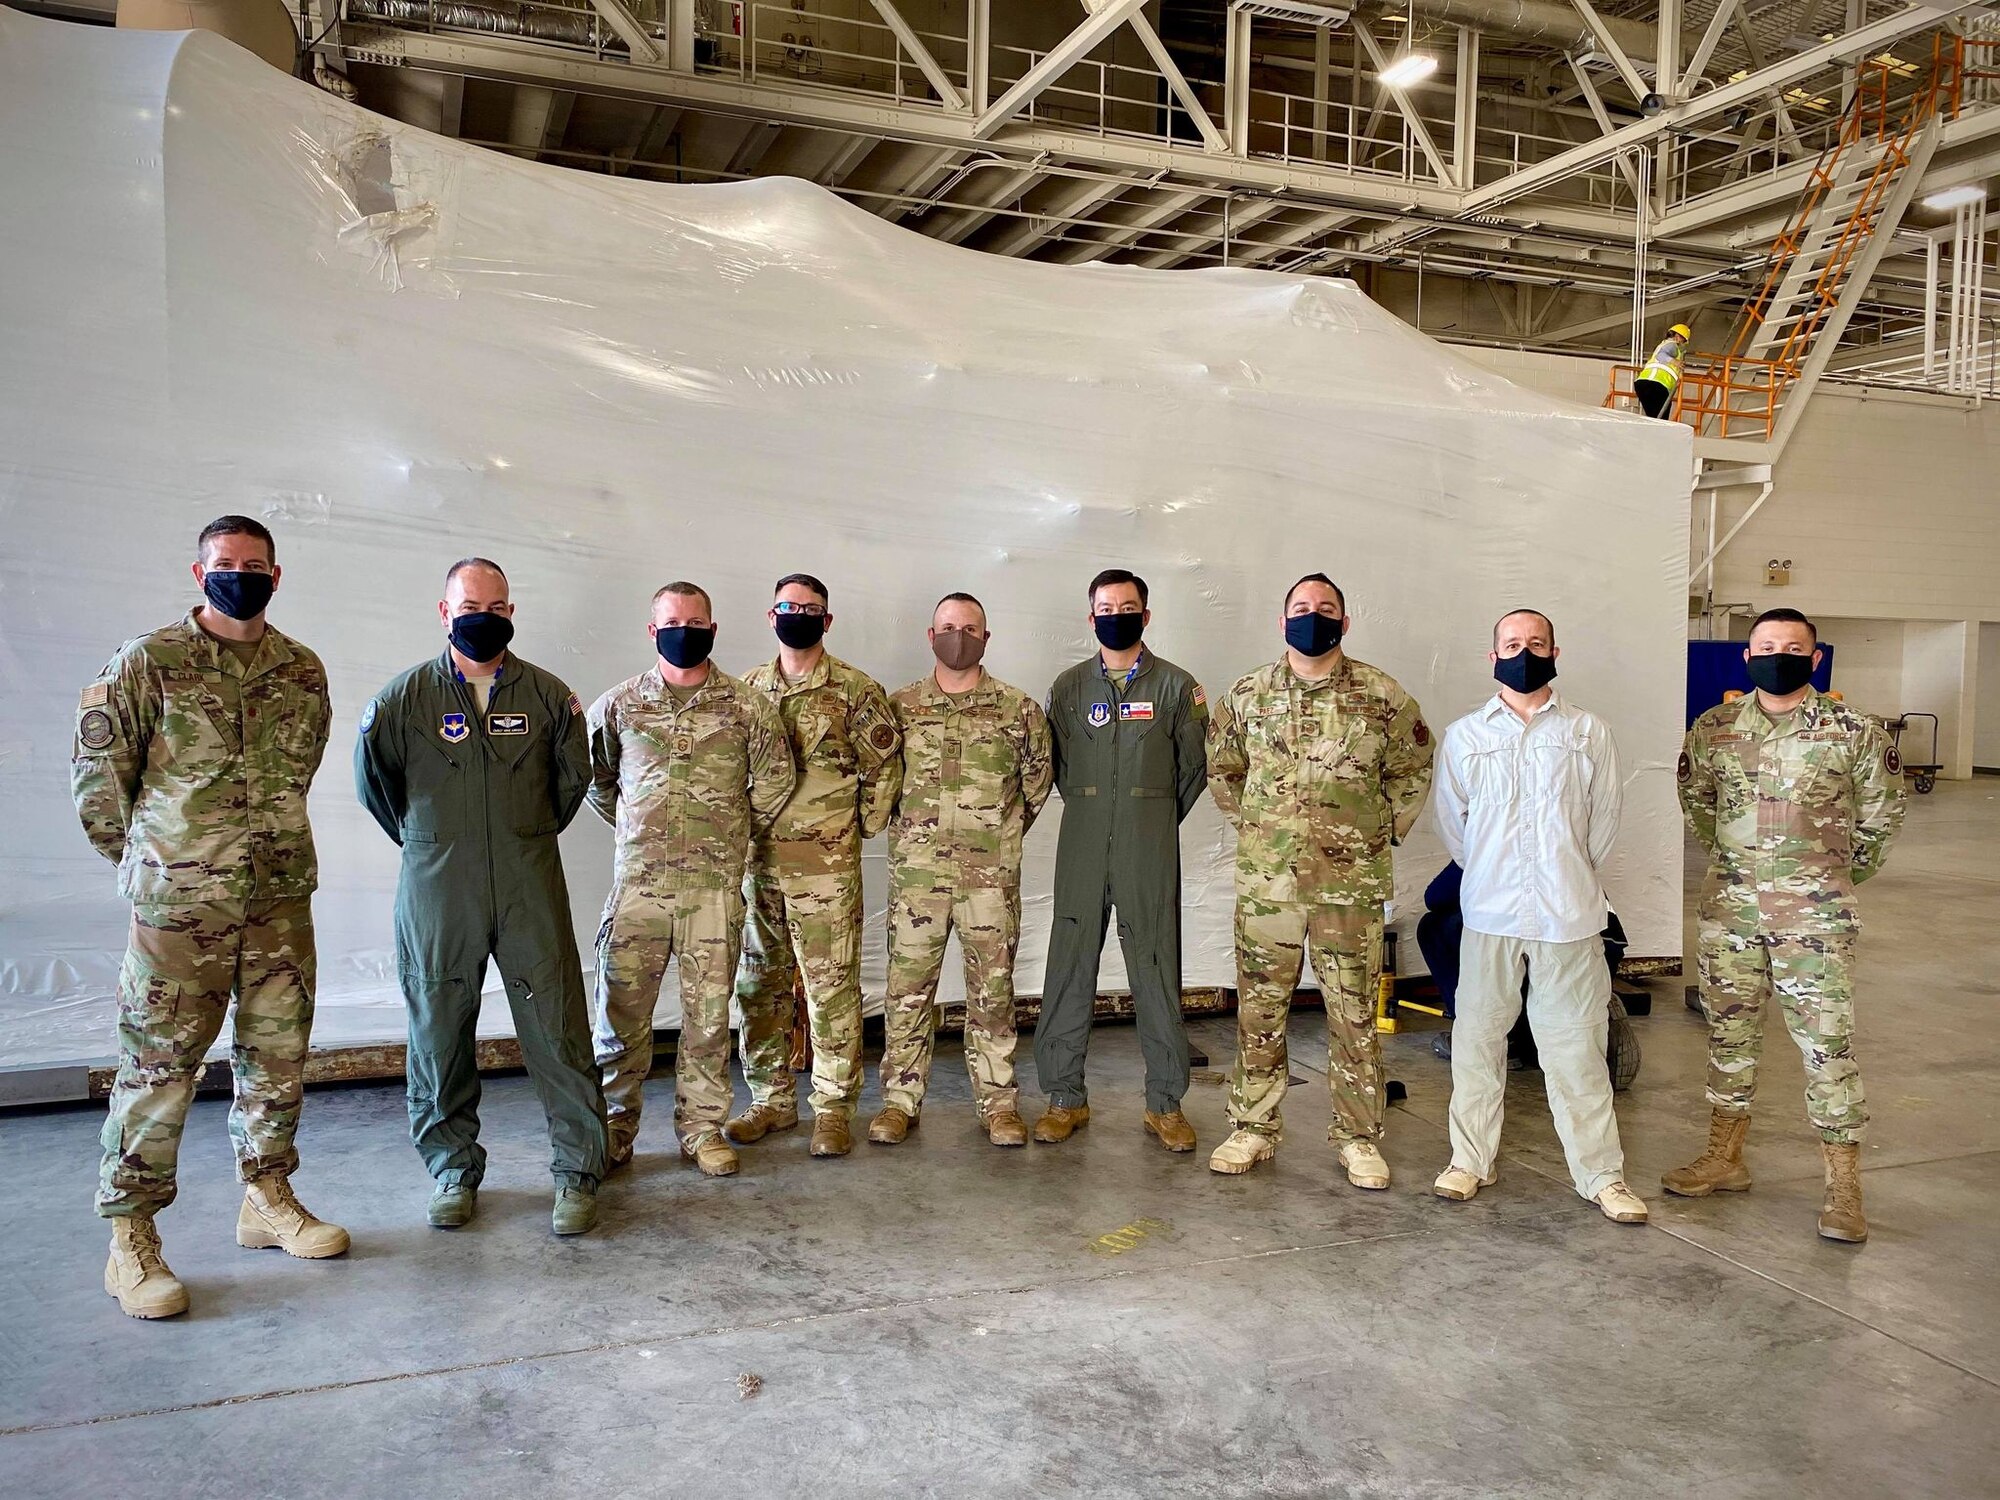 Members of the 344th Training Squadron Career Enlisted Aviator Center of Excellence and 19th Air Force team pose for a photo in front of a newly positioned hypobaric altitude chamber at Joint Base San Antonio-Lackland, Texas, Aug. 25, 2020. The chamber was delivered from Tyndall Air Force Base and will support over 2,300 enlisted aircrew and several hundred permanent party officer and enlisted flyers from across the JBSA community.